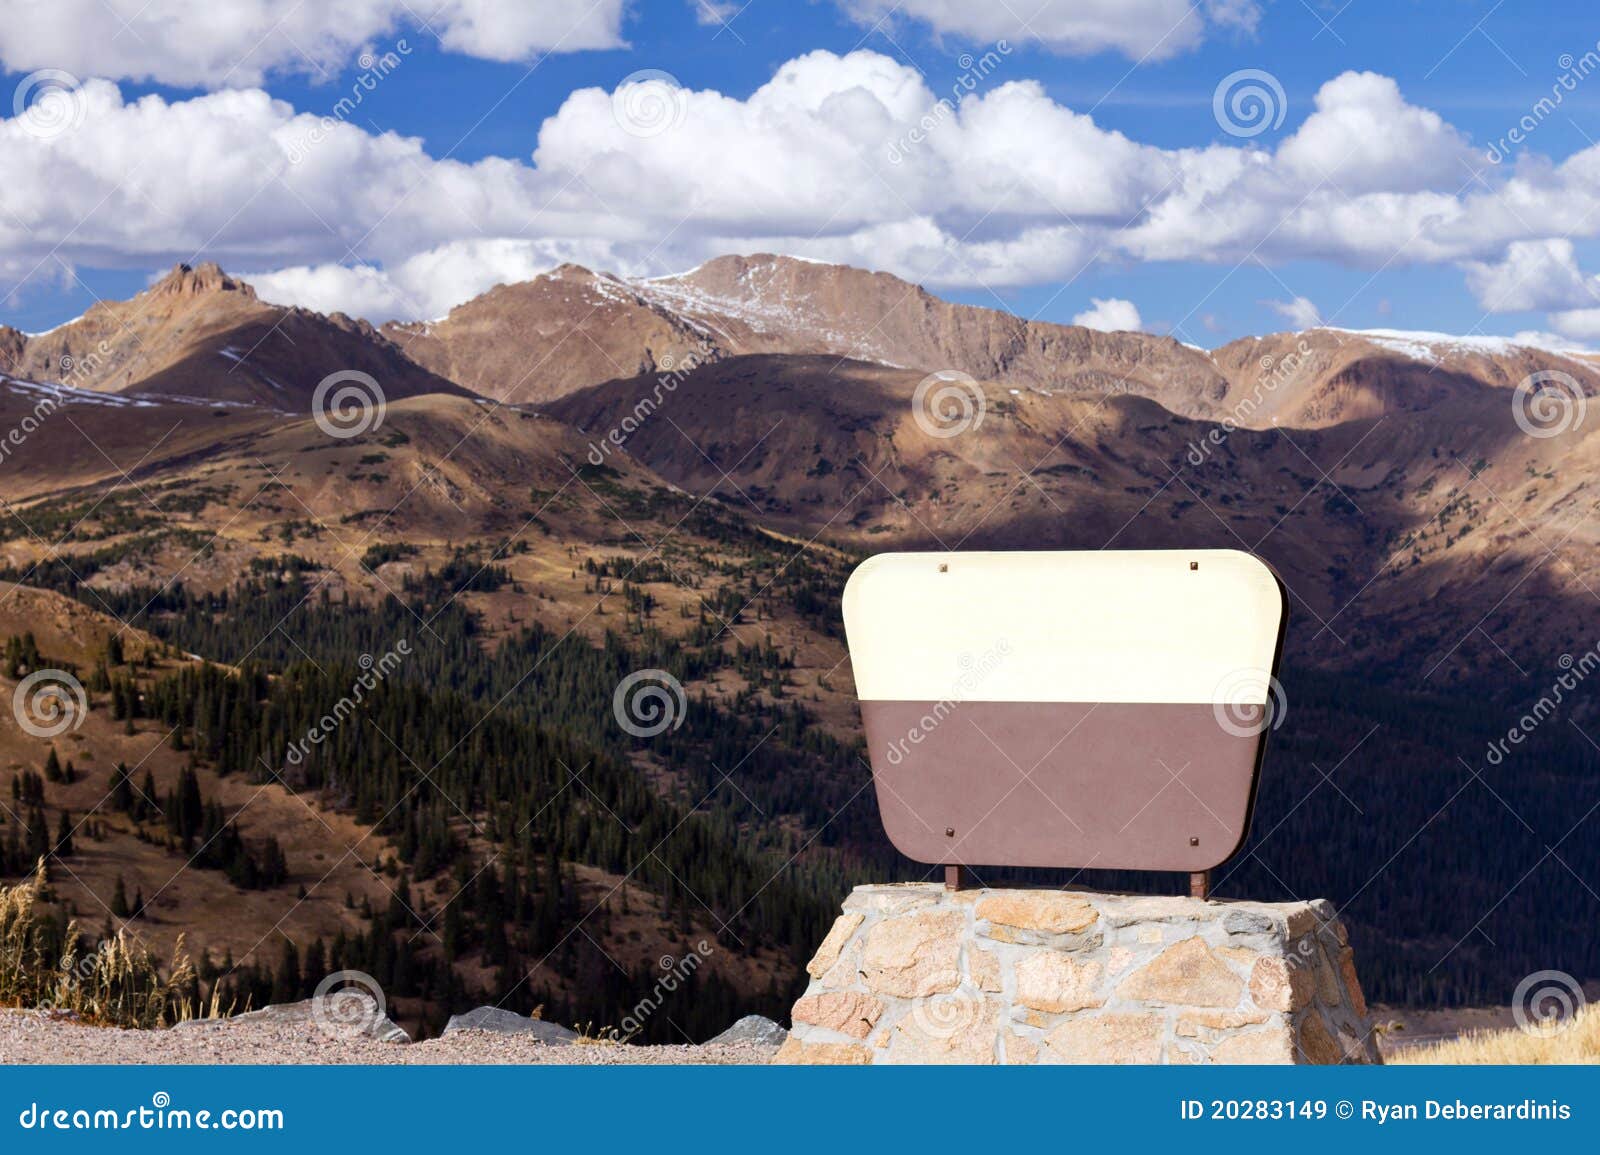 blank sign in front of mountains